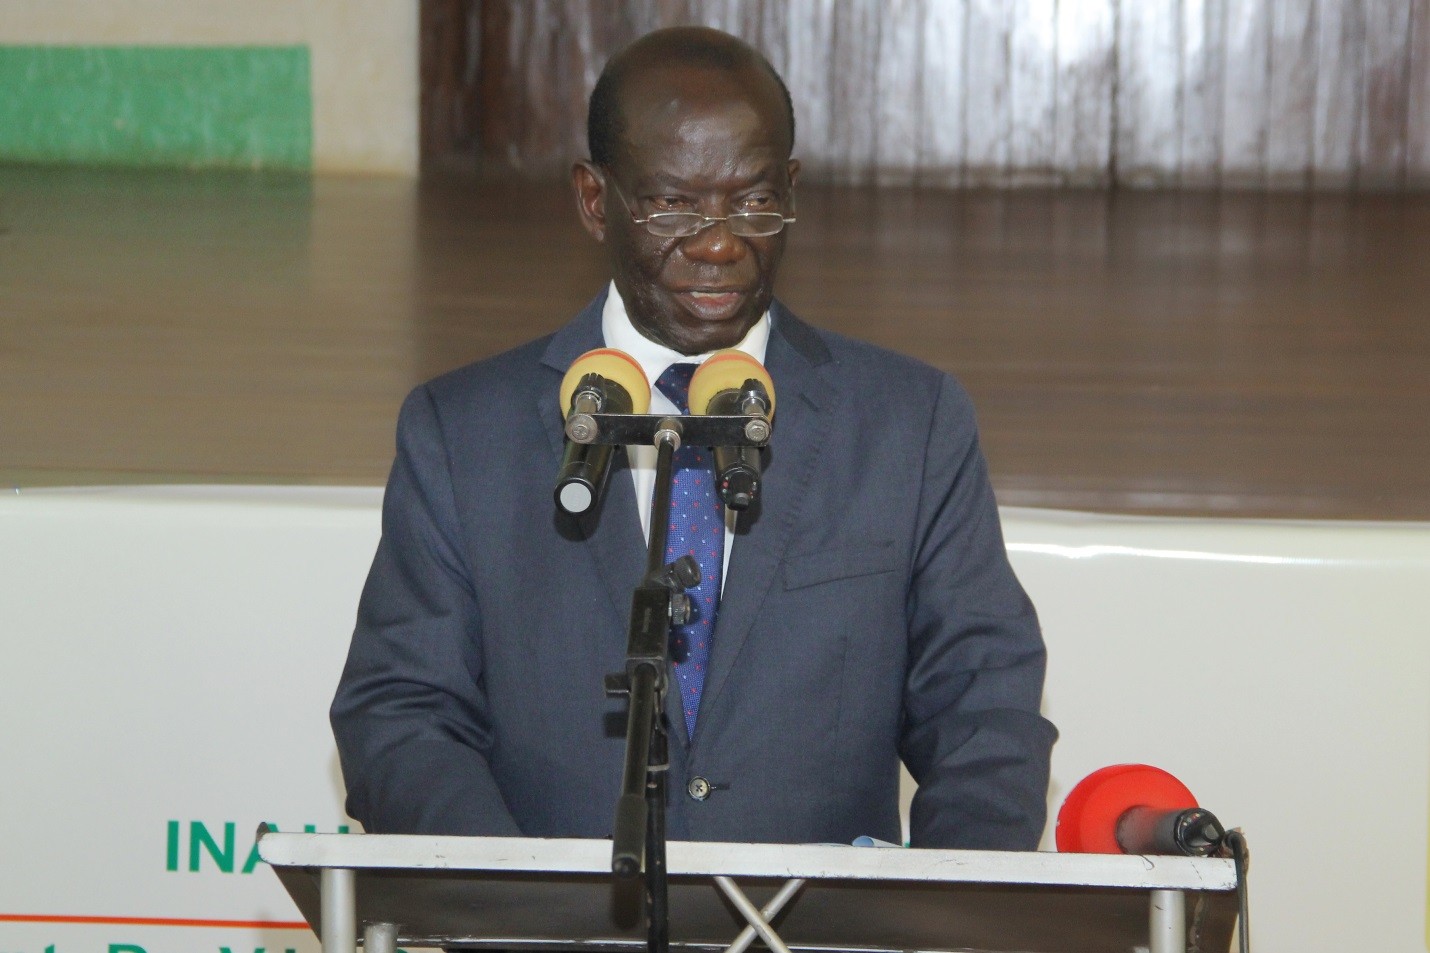 The Vice President, H.E Edward Ssekandi, pledged that government will meet MakSPH researchers to determine how they can partner and take forward the fight against Schistosomiasis.